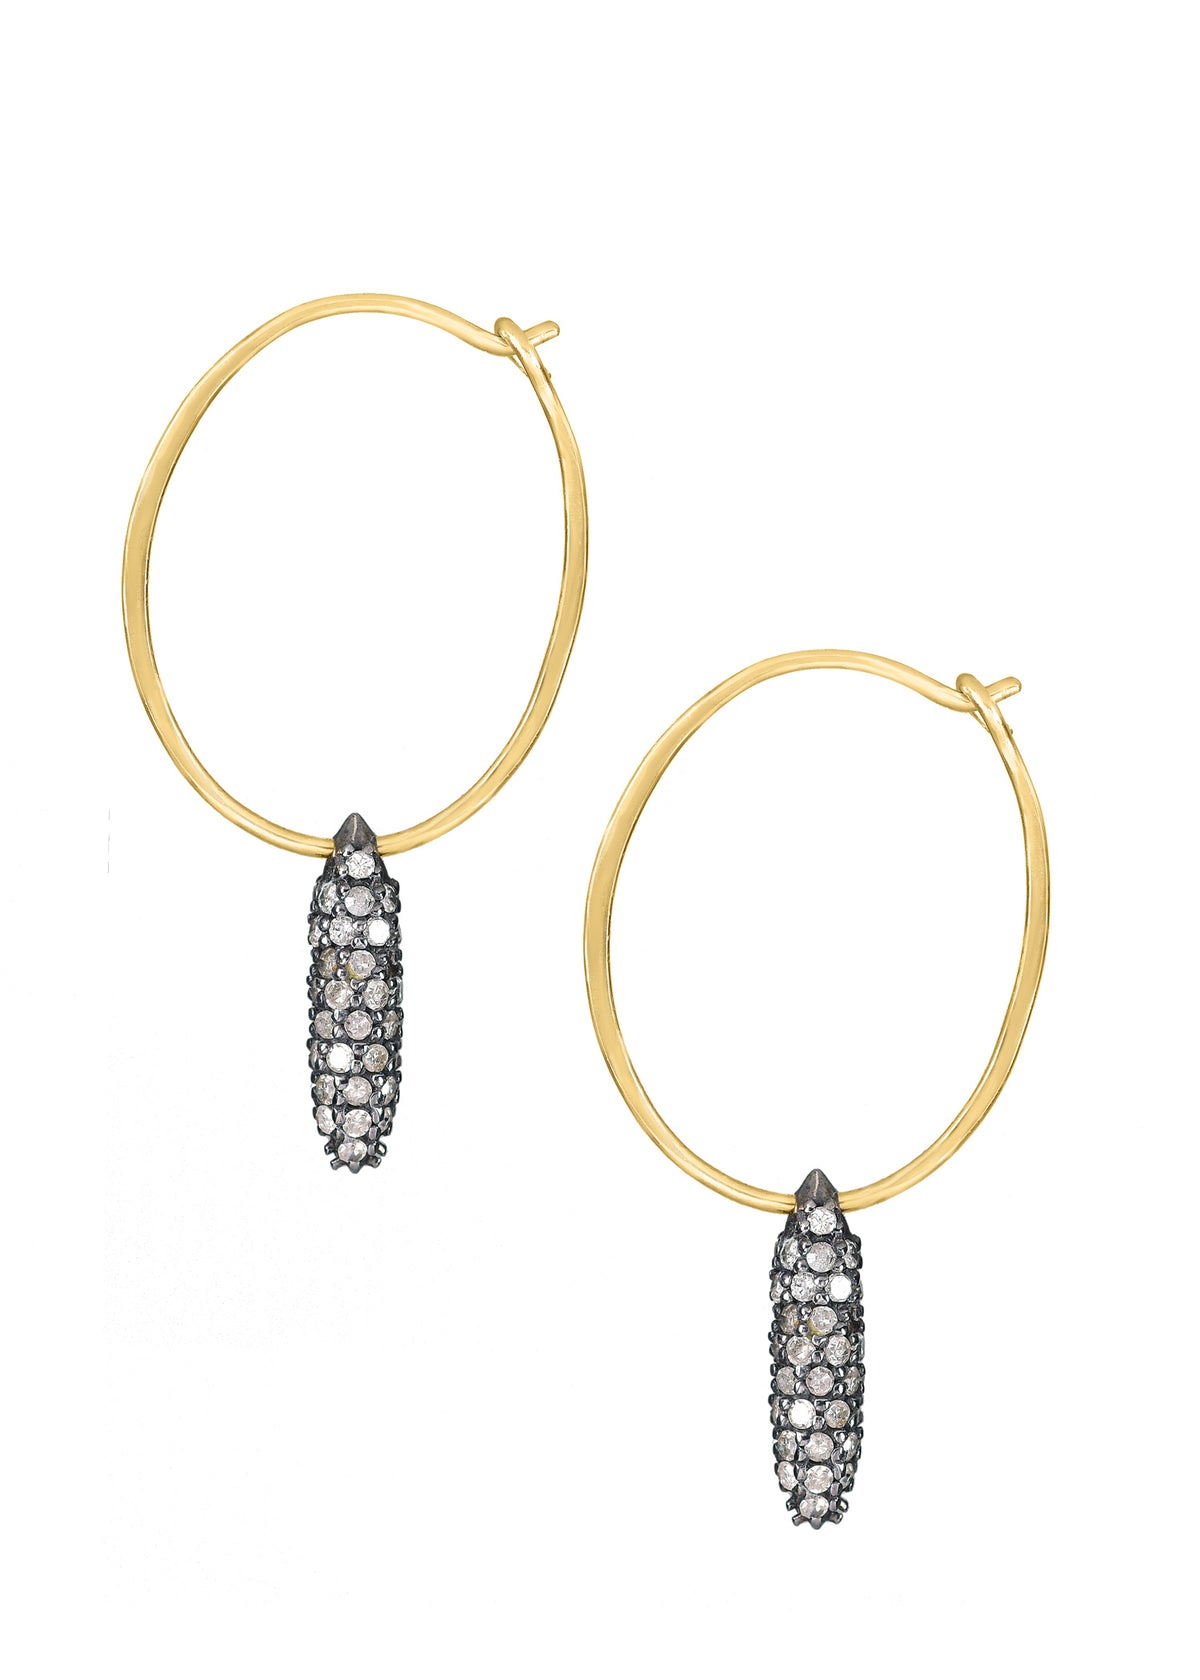 Diamond 14k gold Special order only Earrings measure 1-3/8&quot; in length and 11/16&quot; in width across the widest point of the hoop Handmade in our Los Angeles studio